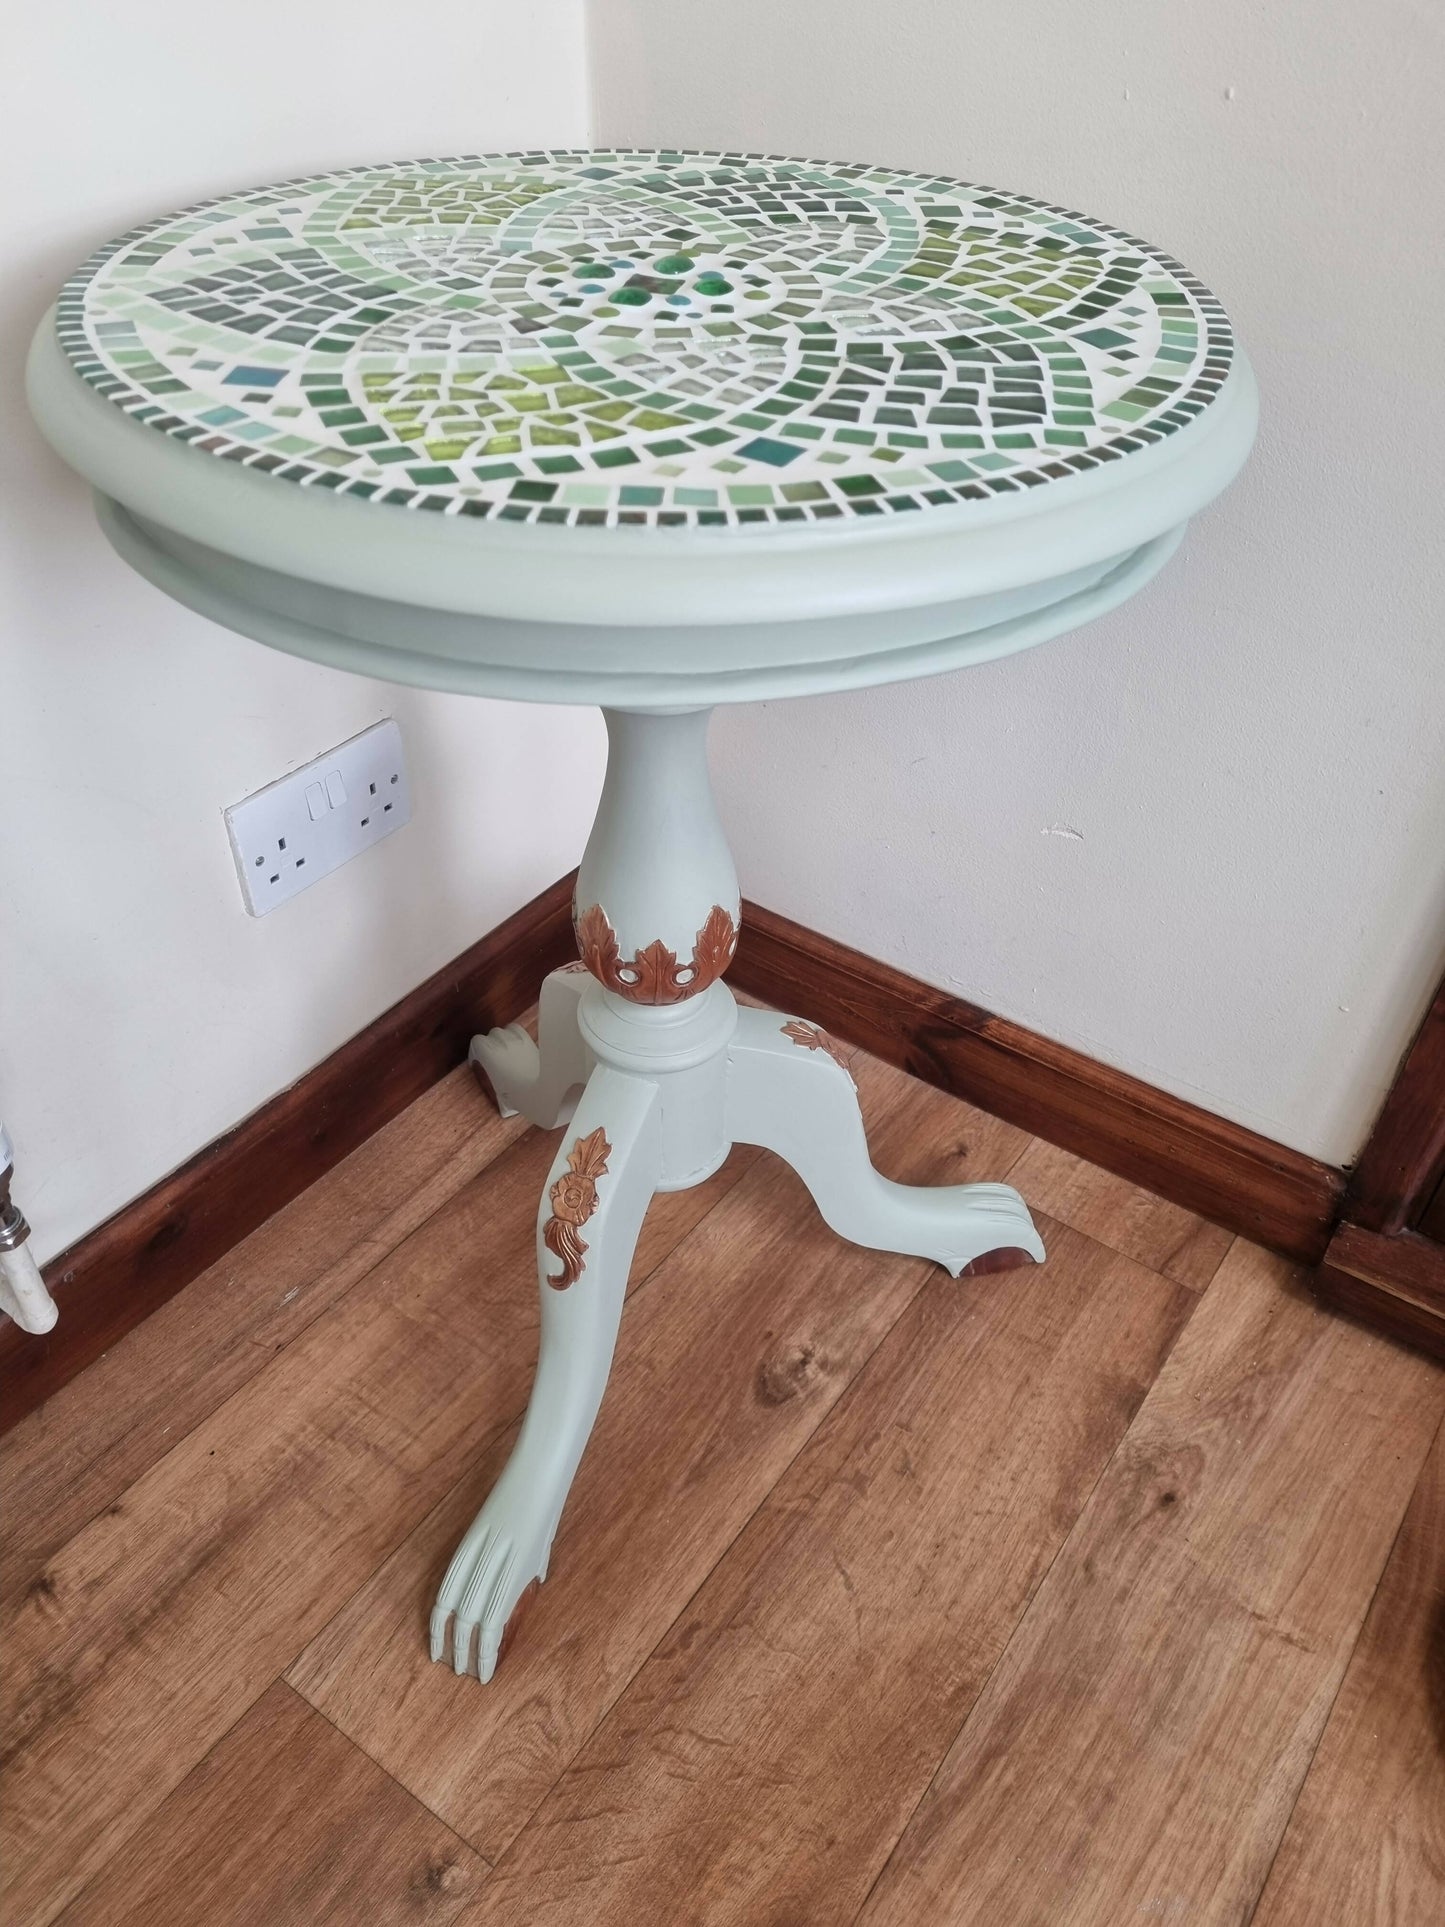 The Mosaic Side Table